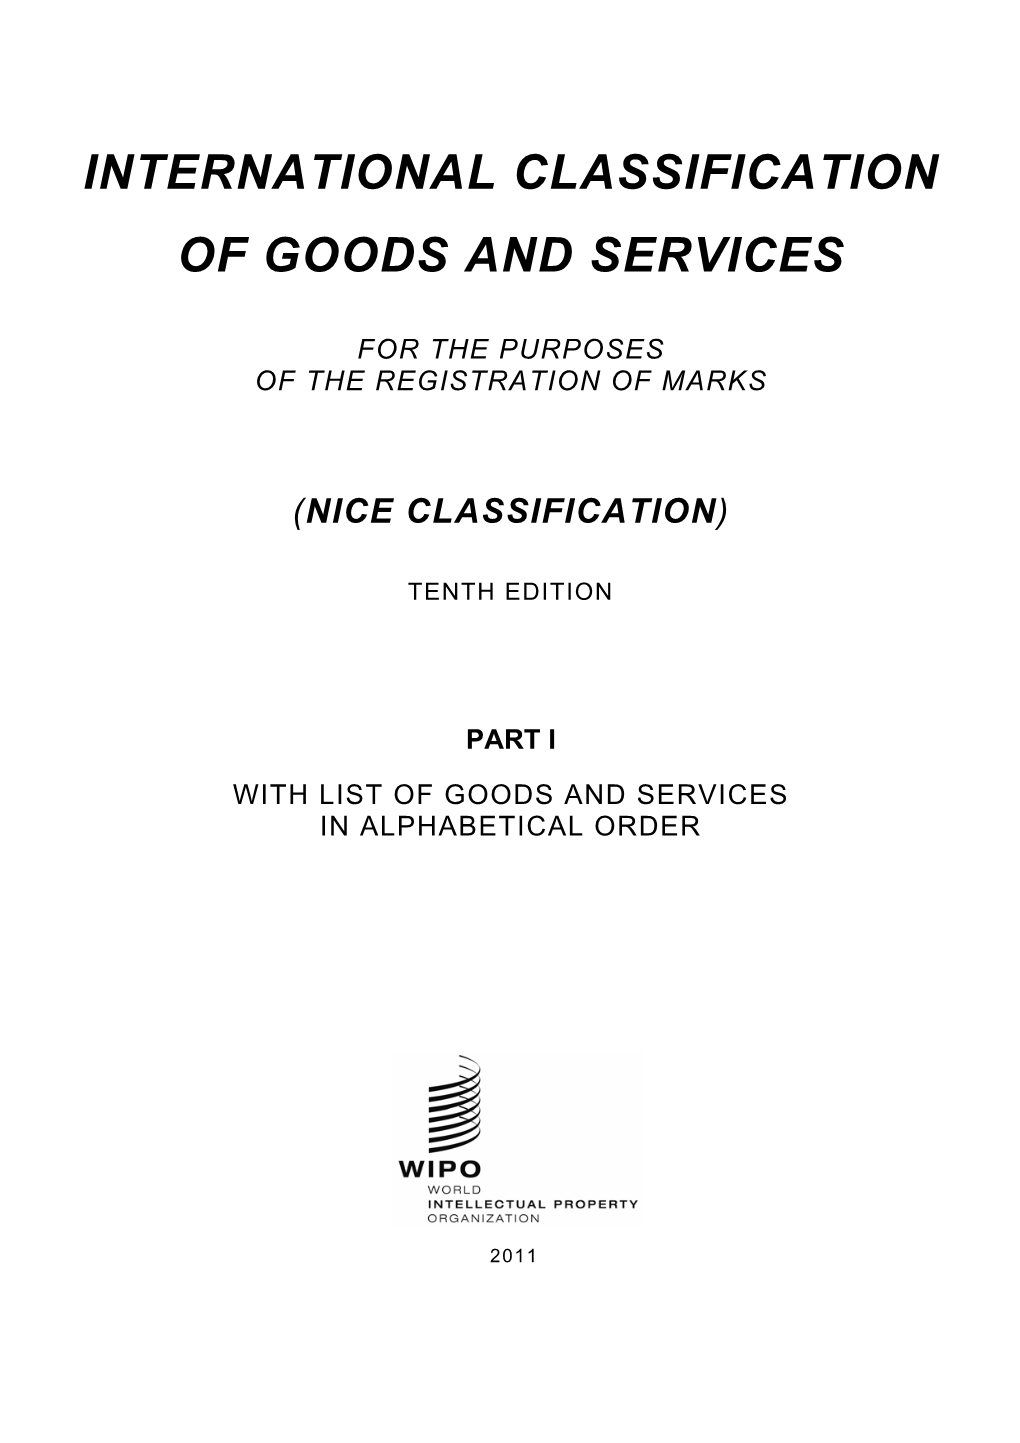 International Classification of Goods and Services